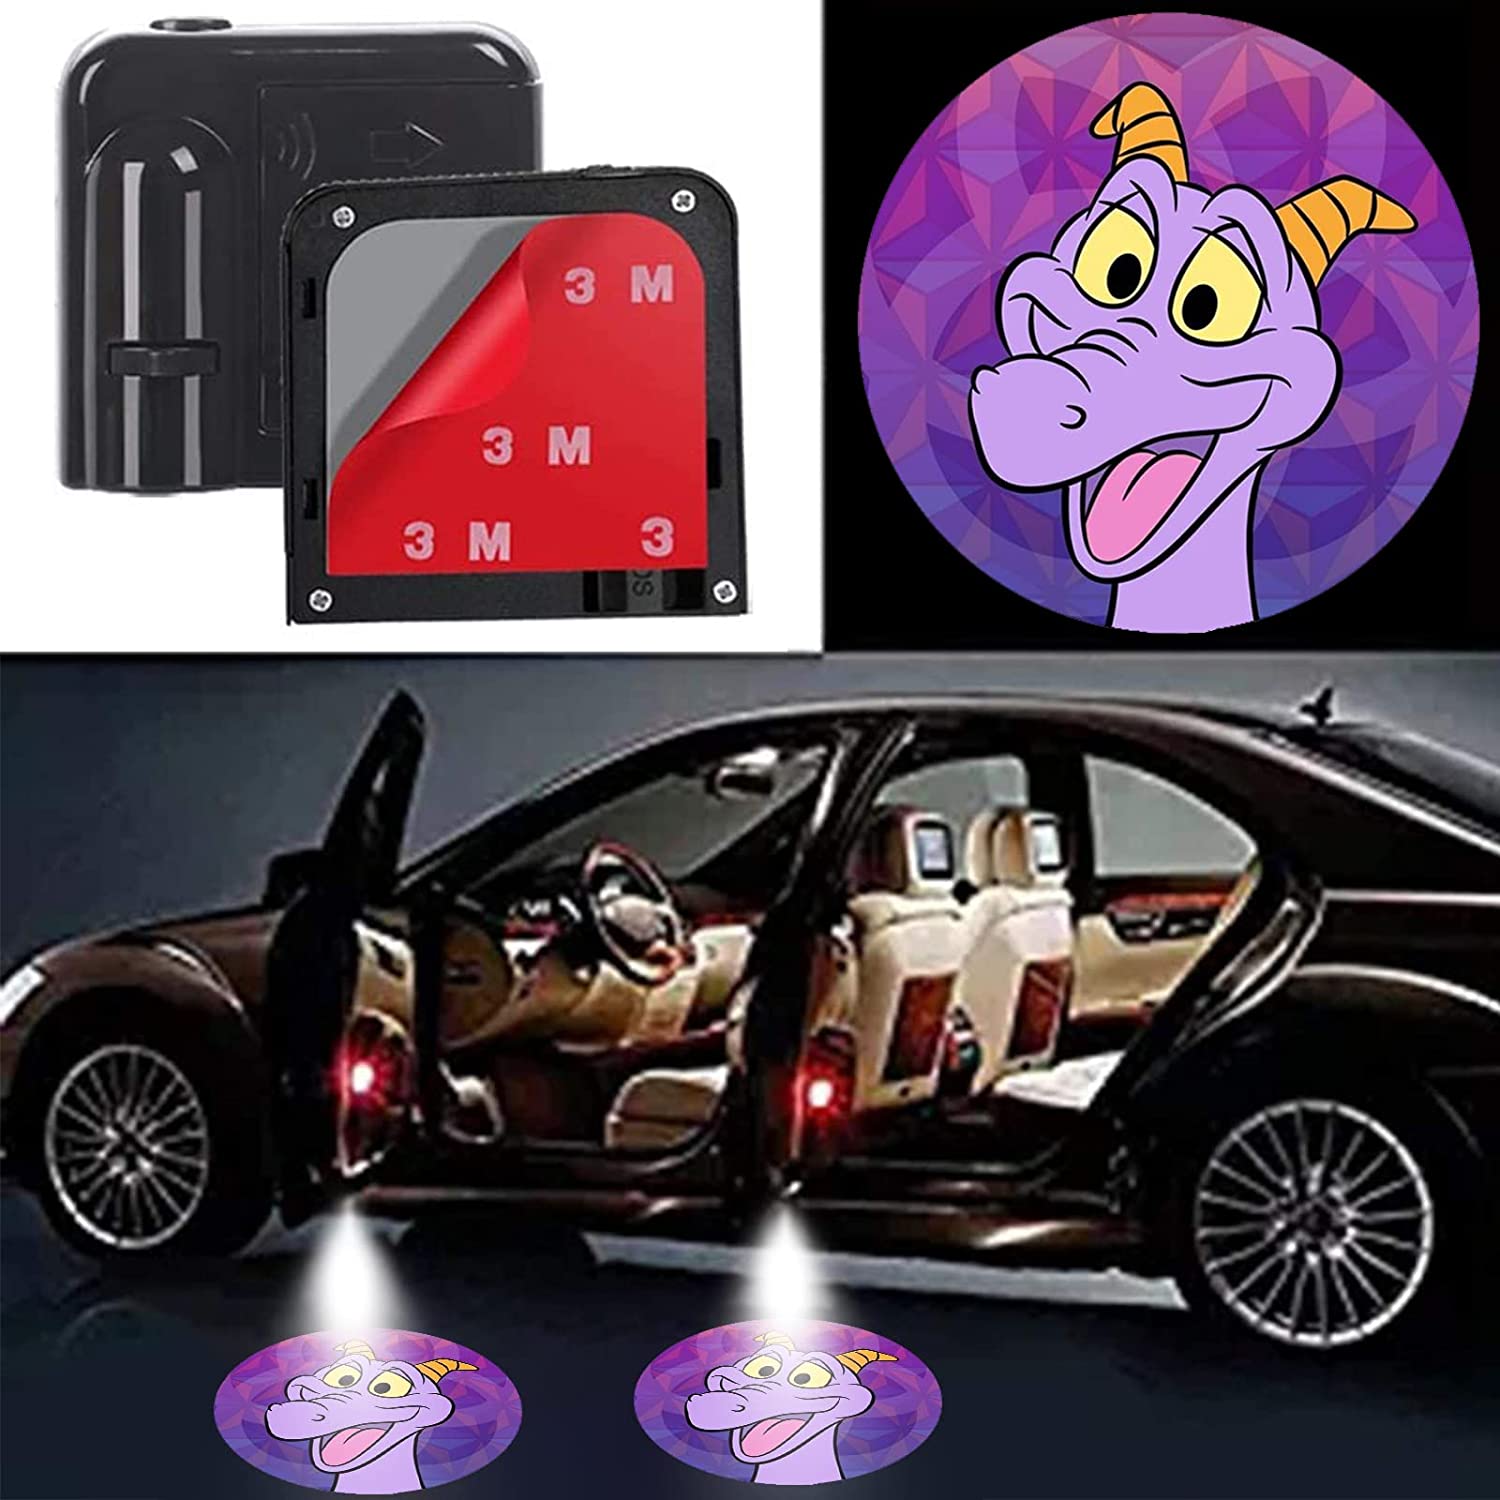 Light up Your Car in Disney Style With These Figment Led Door Lights